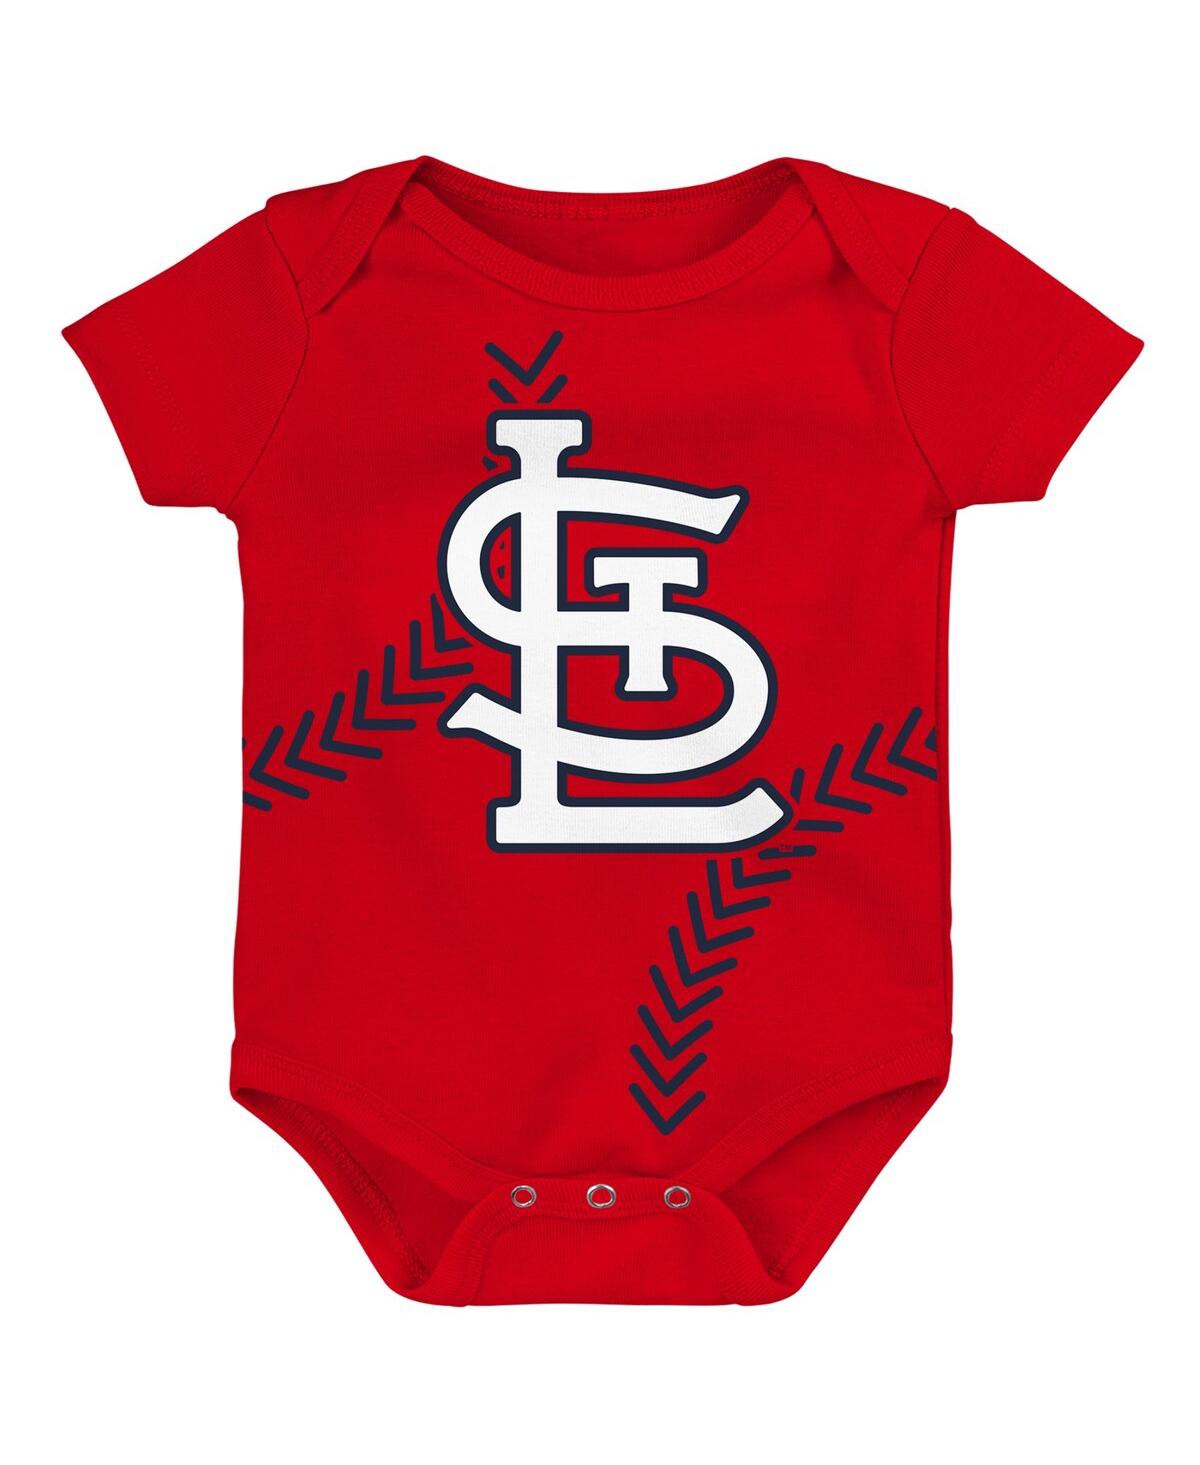 Outerstuff Babies' Newborn And Infant Boys And Girls Red St. Louis Cardinals Running Home Bodysuit